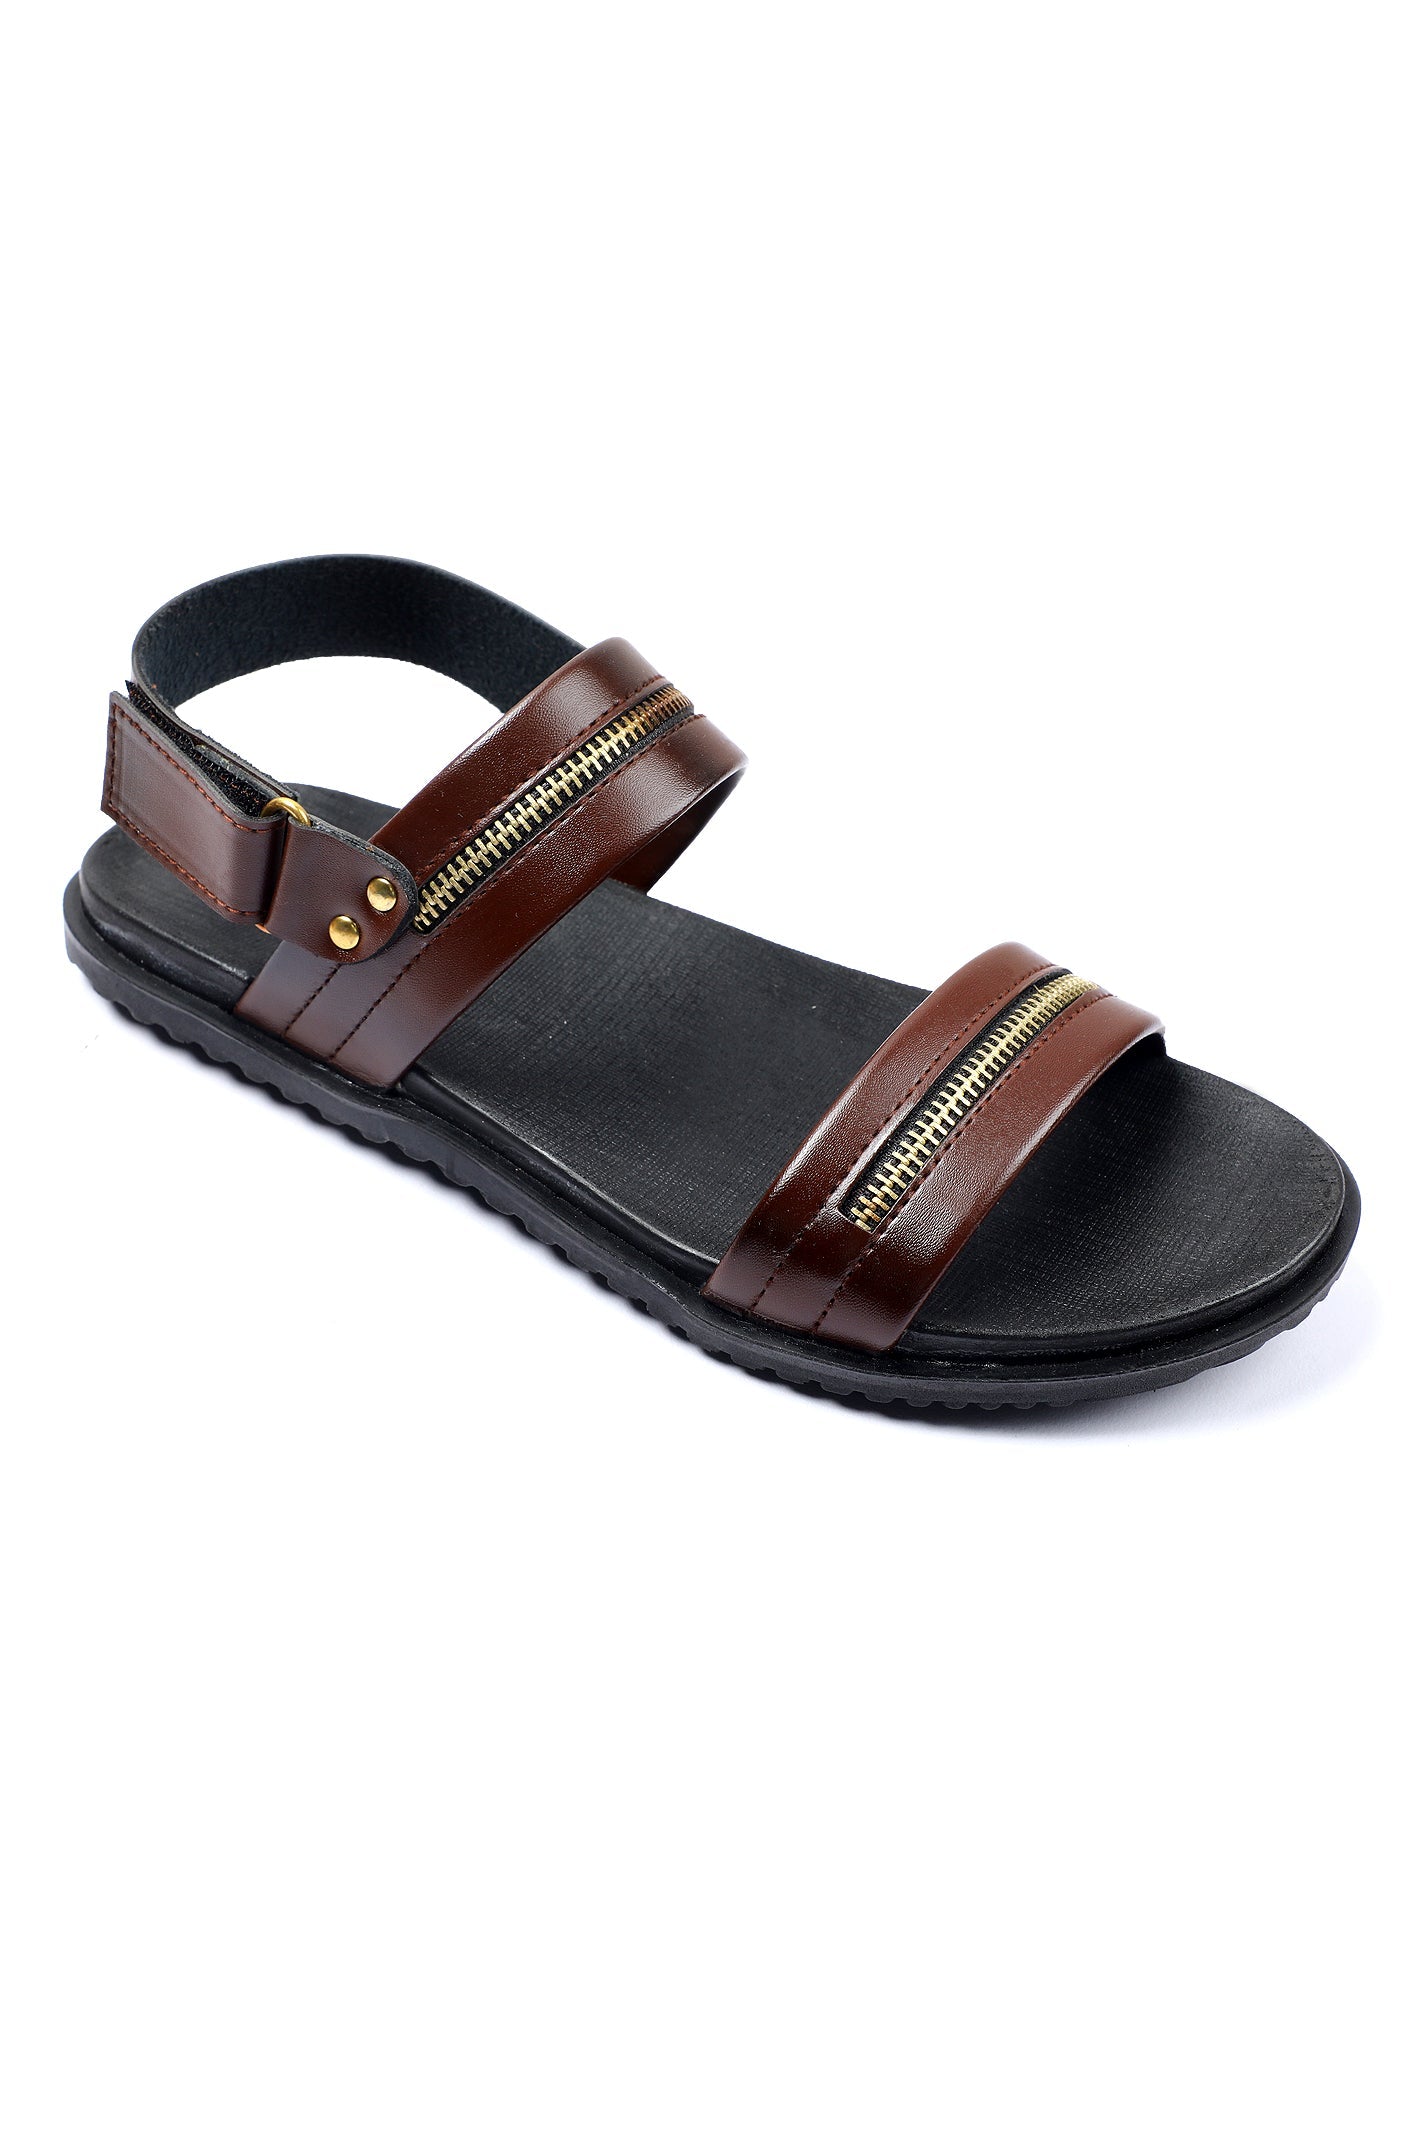 French Emporio Men's Sandal SKU: SLD-0043-BROWN - Diners